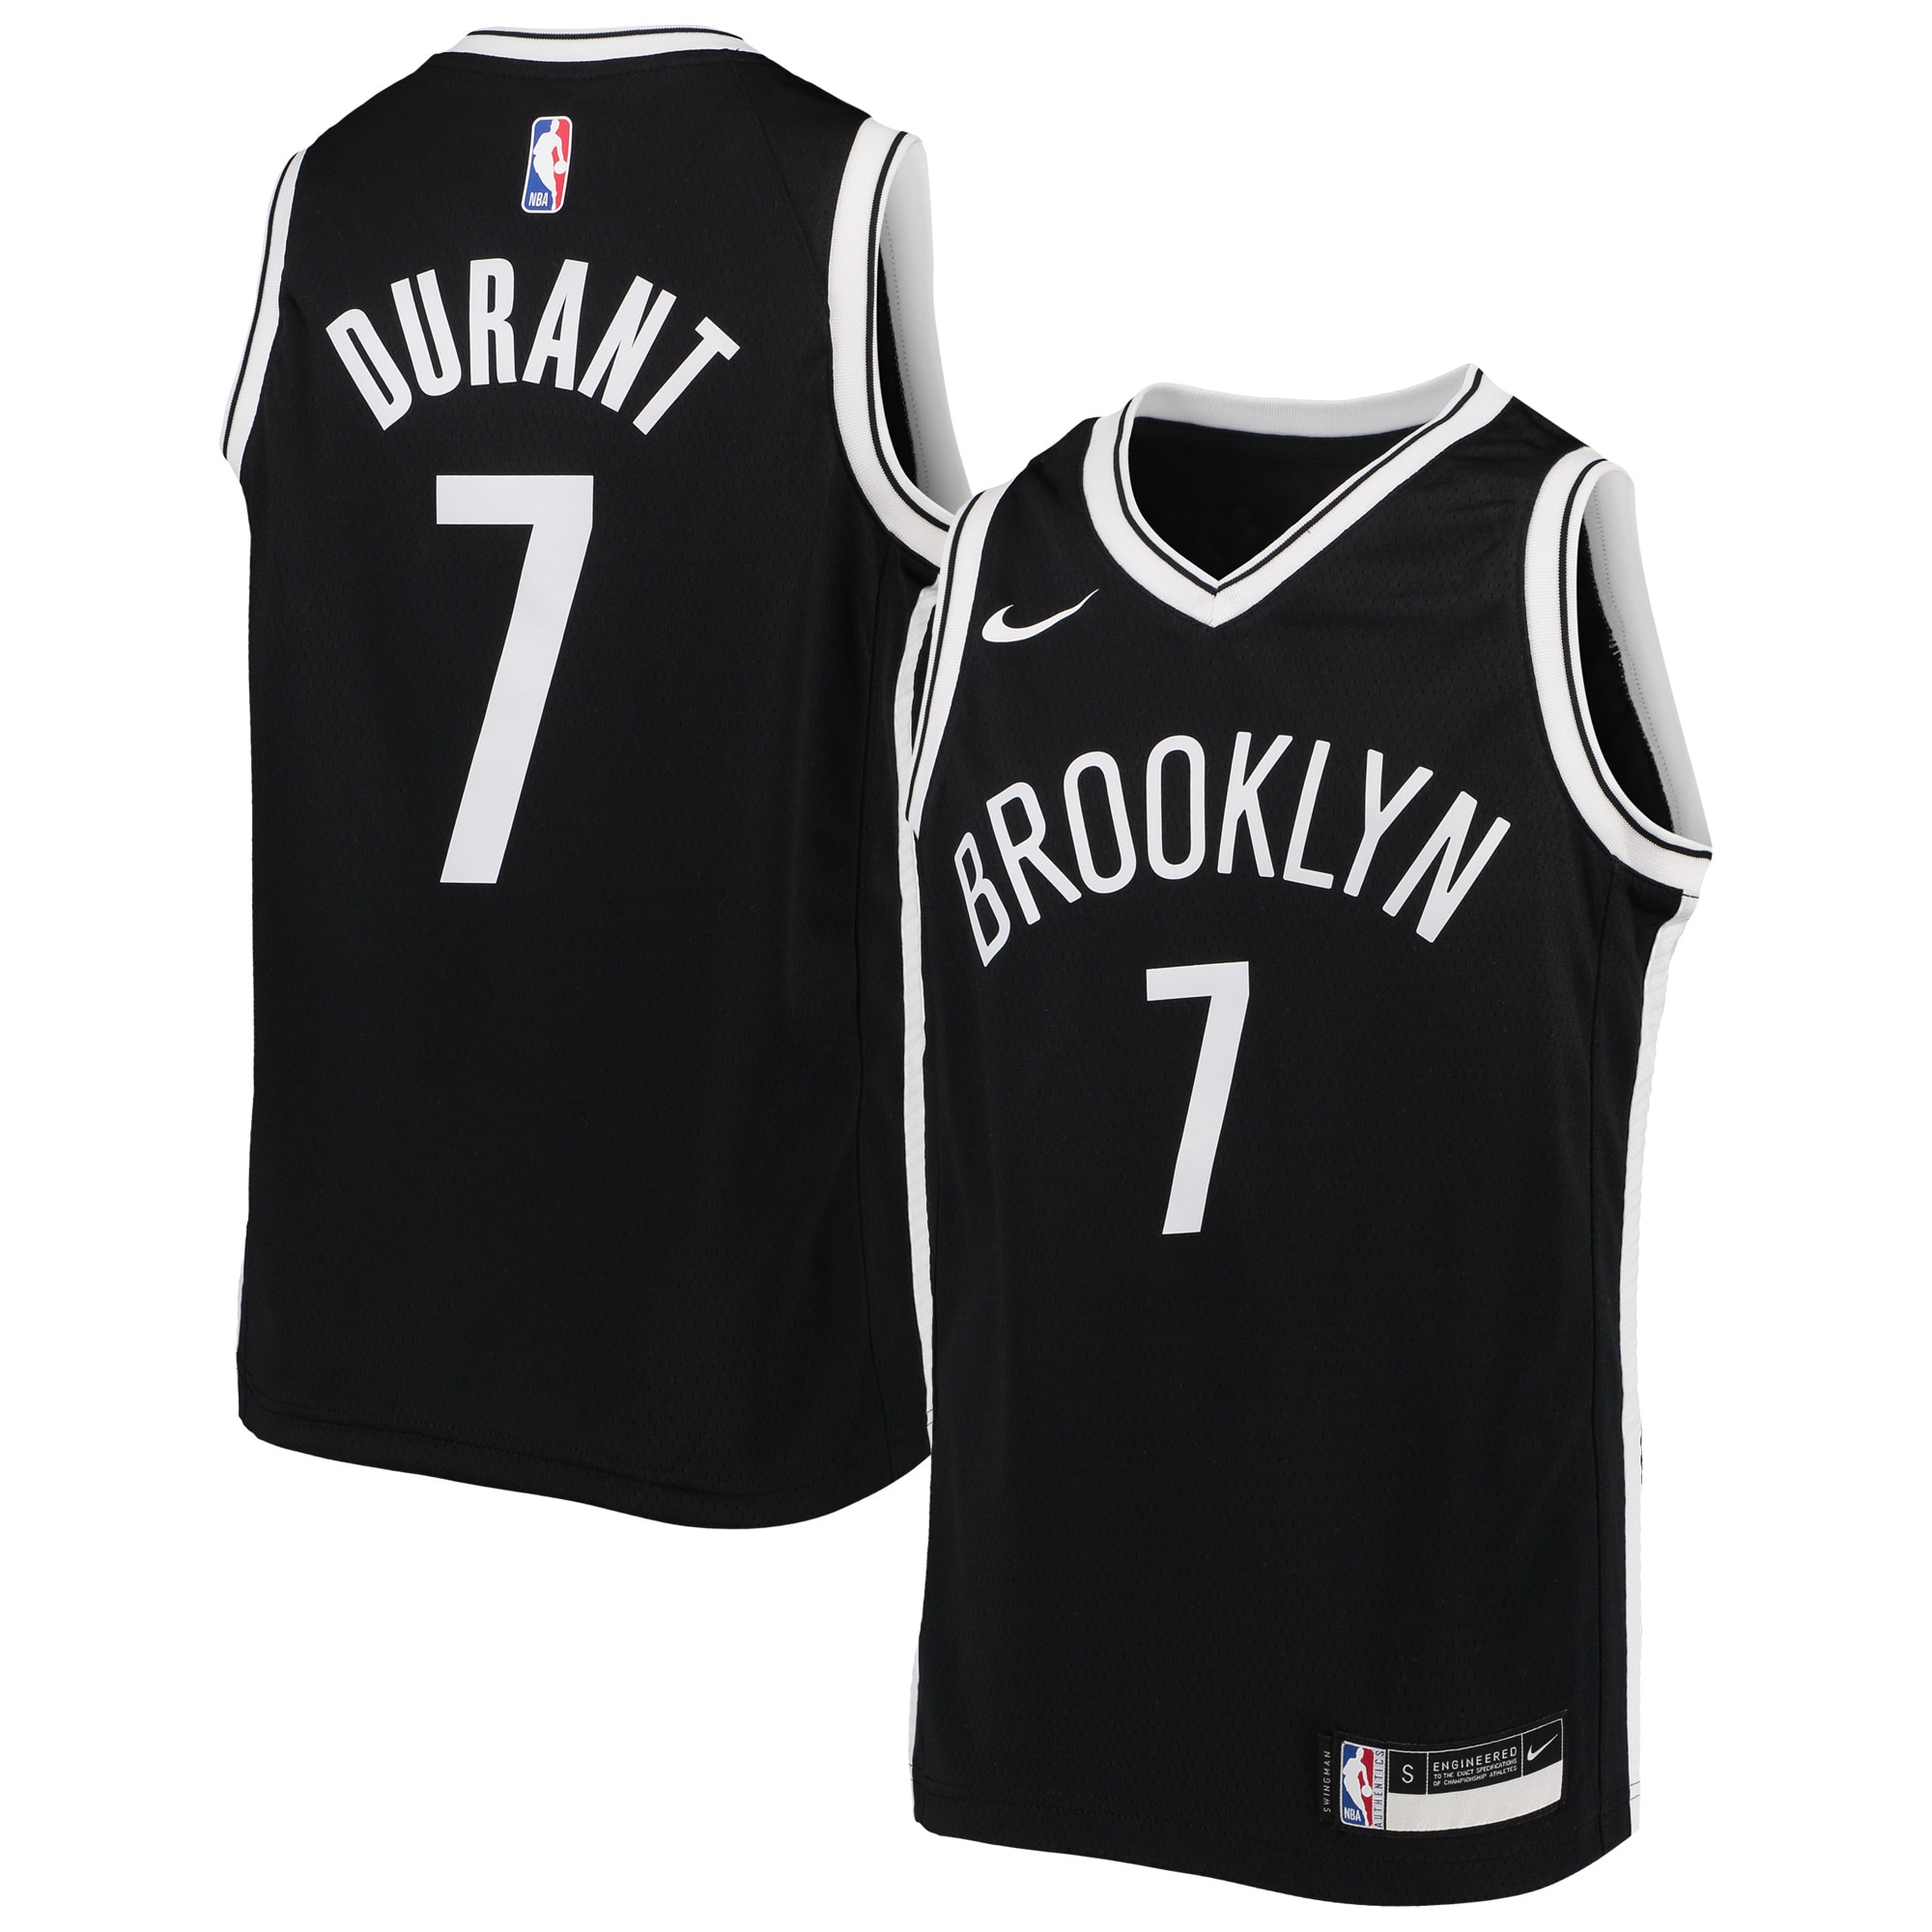 Youth Nike Kevin Durant Black Brooklyn Nets Swingman Jersey - Icon Edition - image 1 of 3